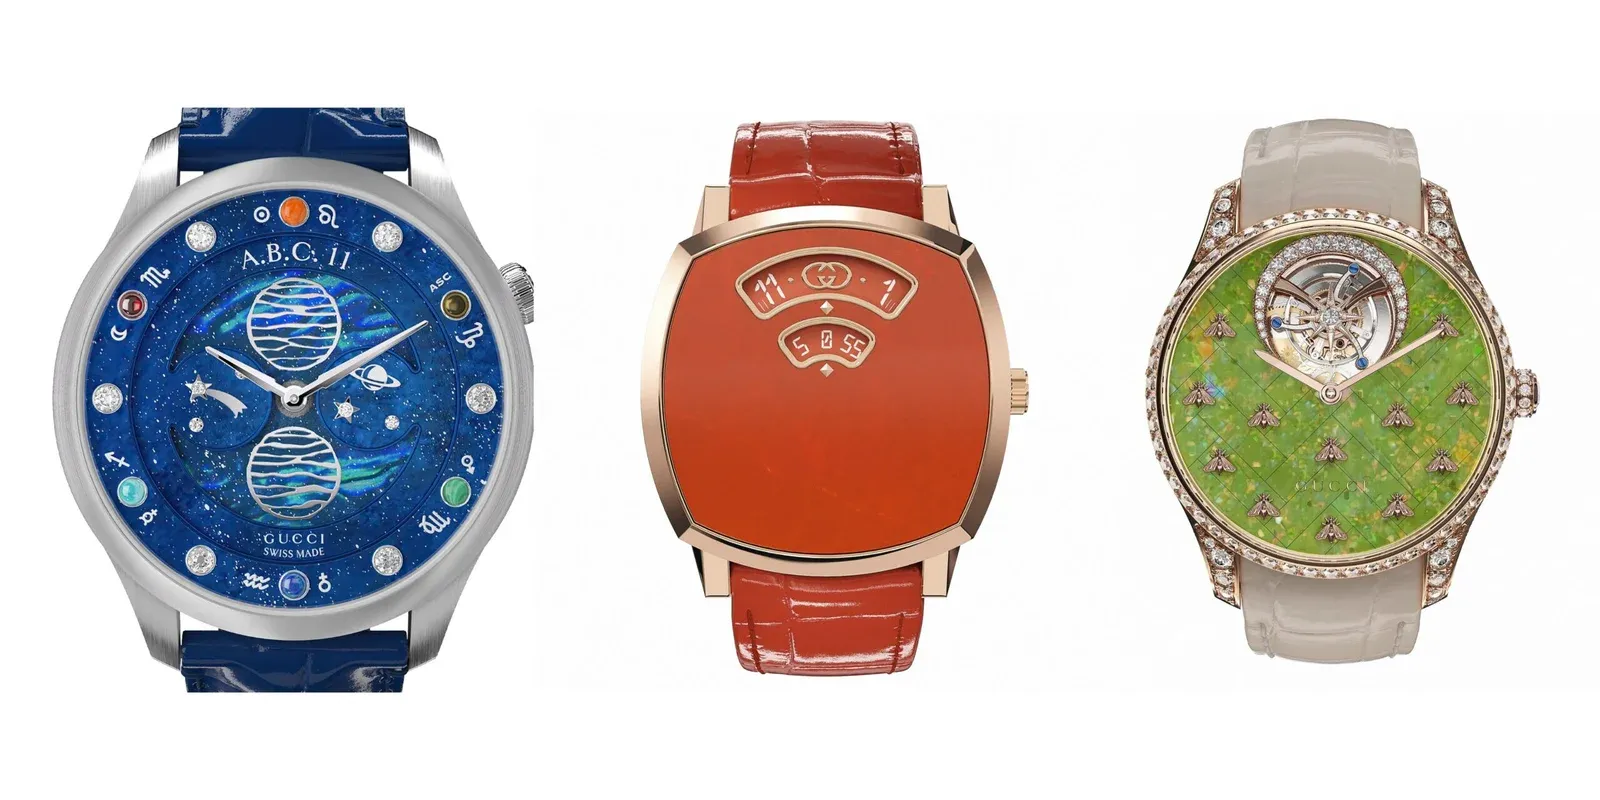 Gucci never forgets to creatively challenge the norm and craft watches that abide the codes of the house in every way (L-R): G-Timeless Moonlight, Gucci Grip and G-Timeless Dancing Bees